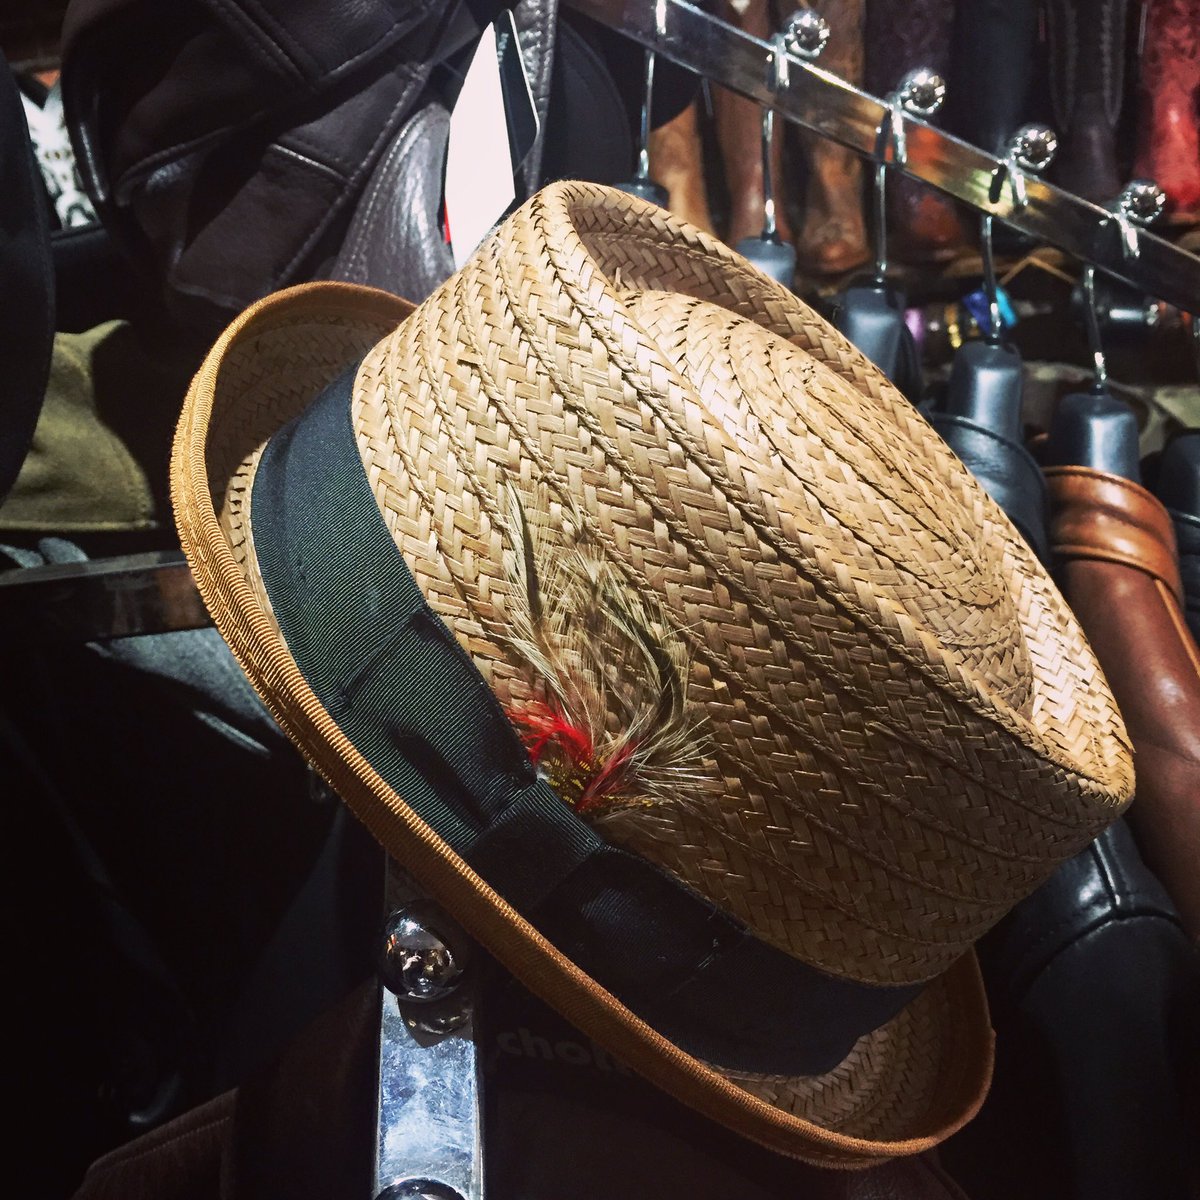 Get the straw hats you need at @helensleather  before you melt in this heat! 
.
.
.
#helensleathershop #boston #strawhat